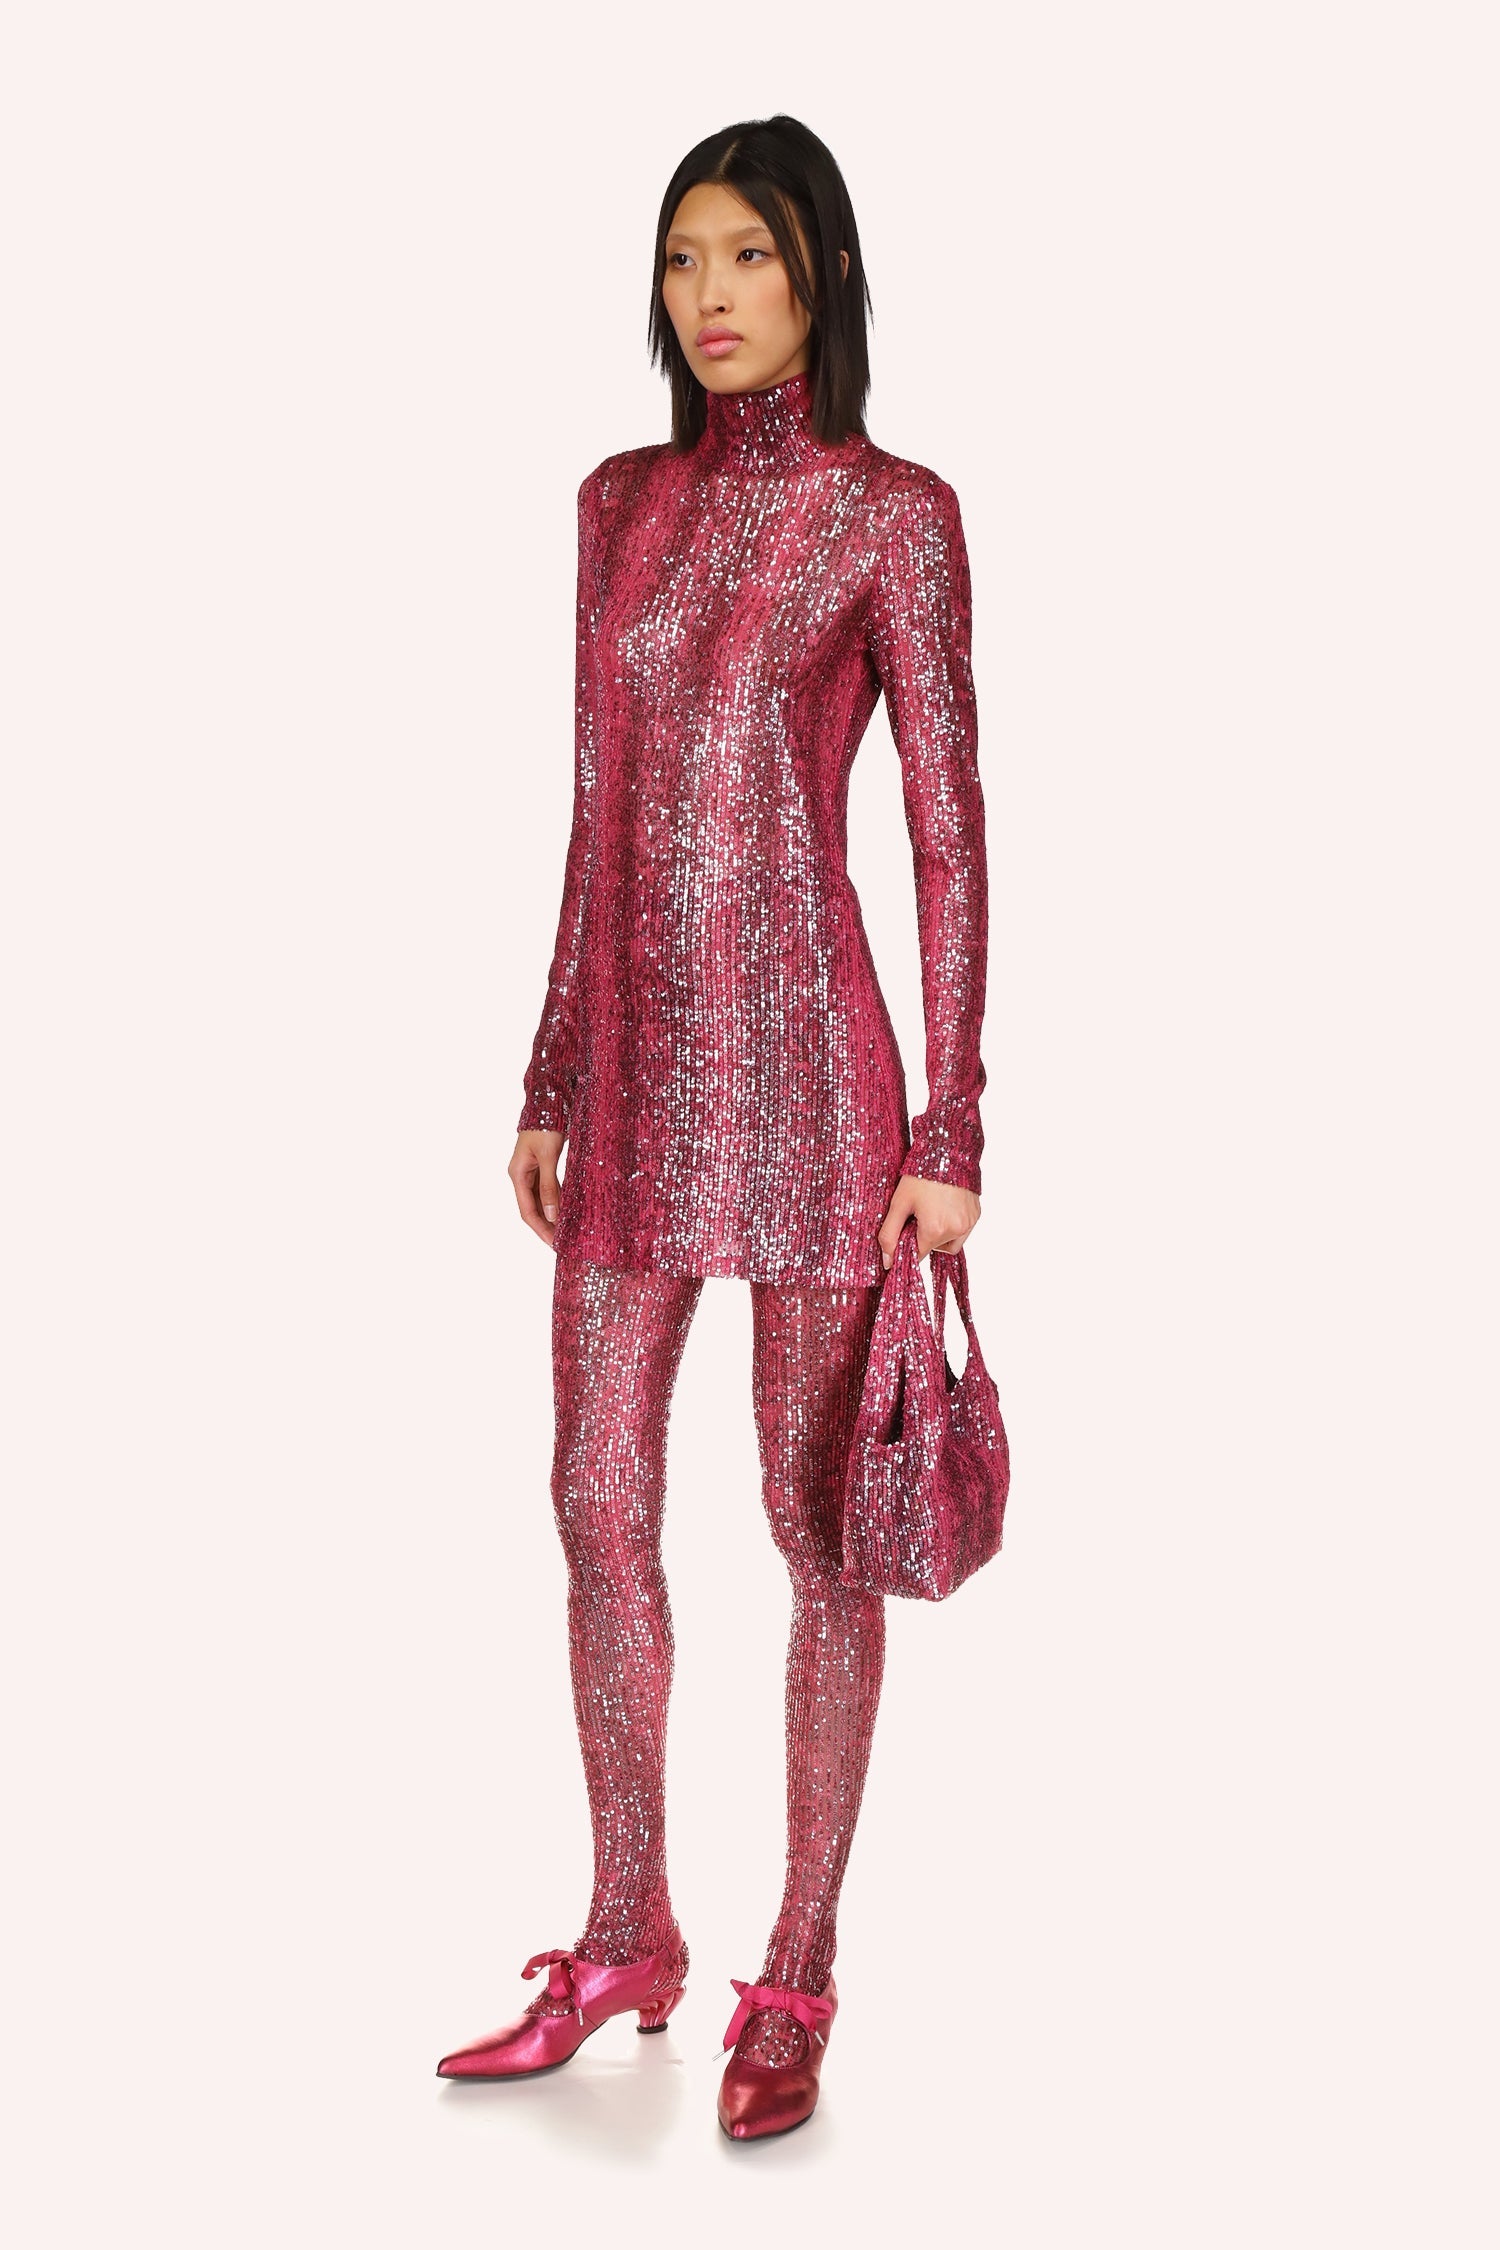 This glamorous long sleeves, turtleneck mini dress, shiny ruby red color is designed with the finest attention to detail